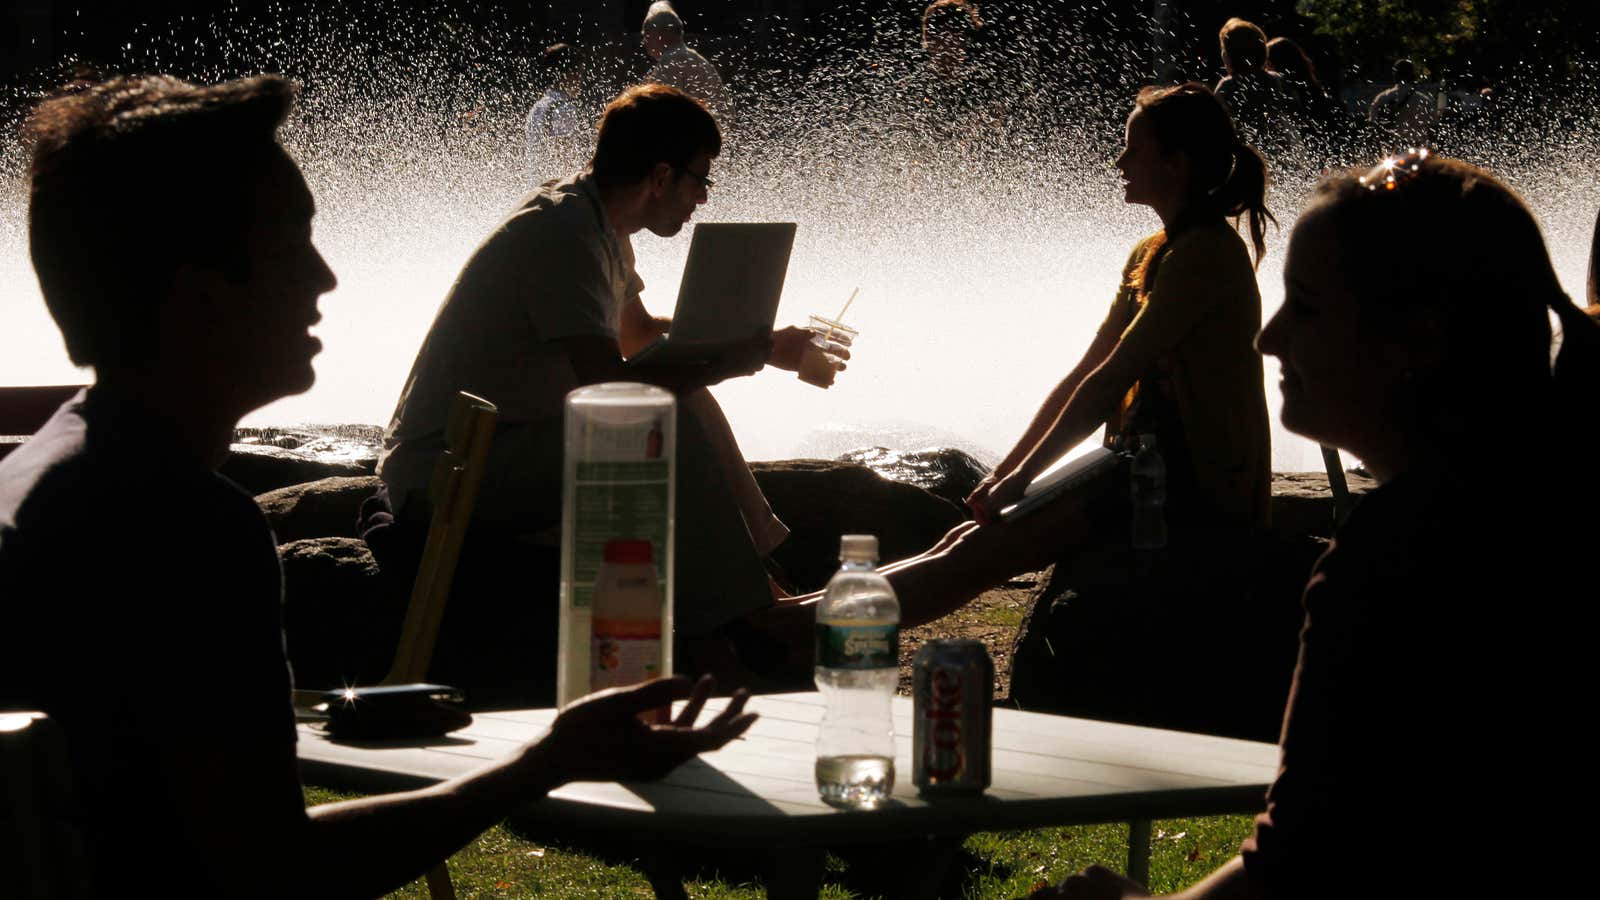 Students and visitors sit in front of a fountain at Harvard University.